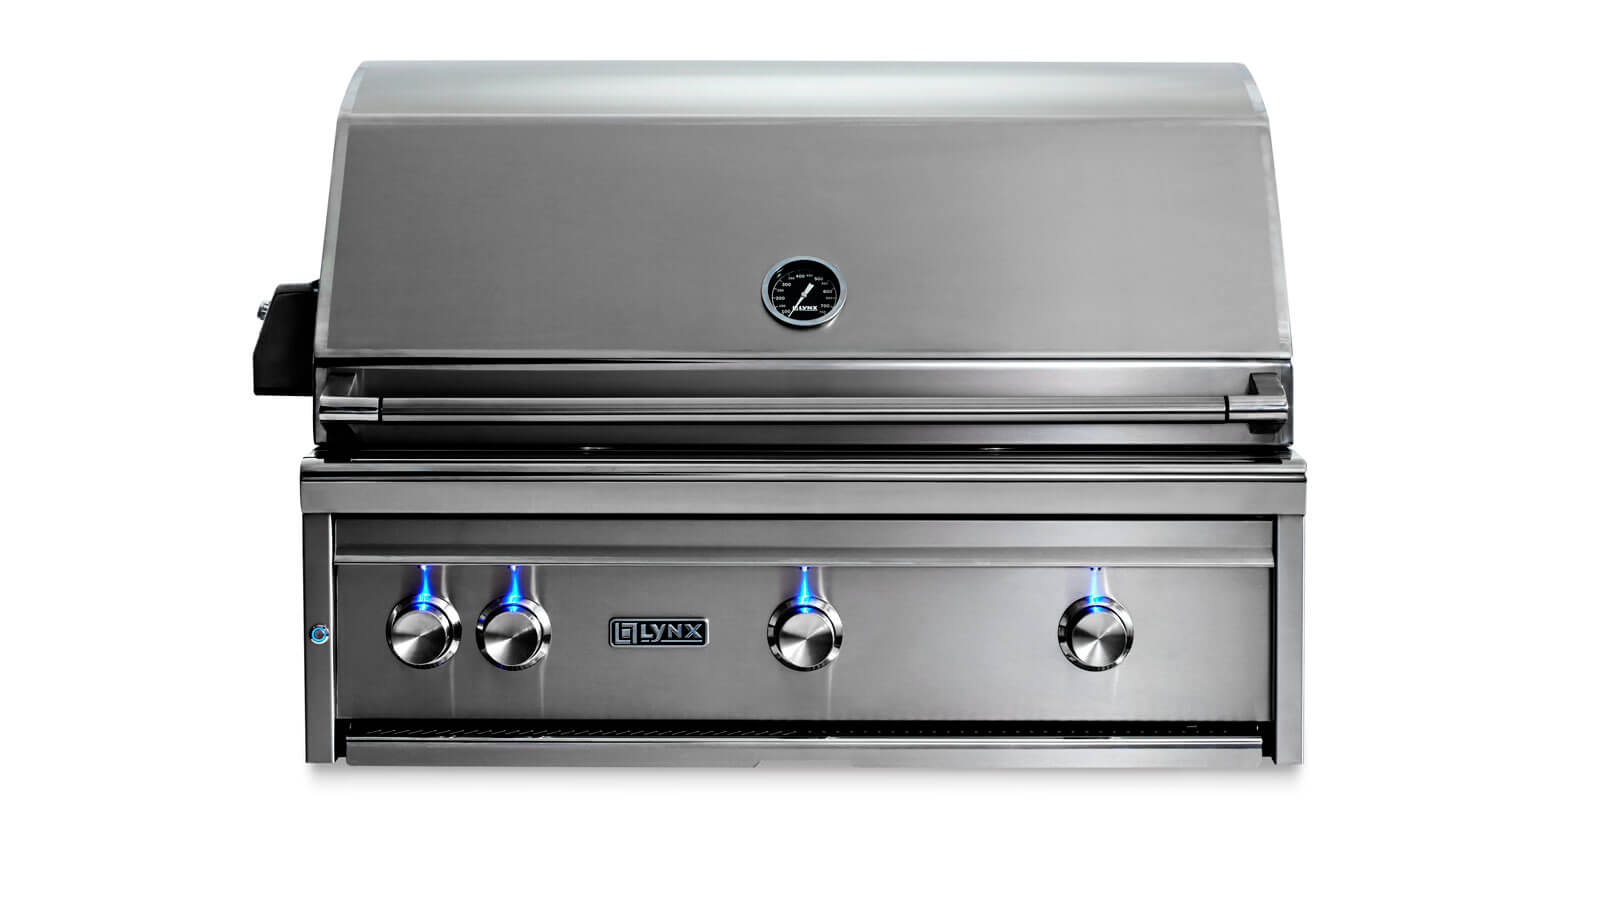 Lynx Professional 36" Built-in Grill